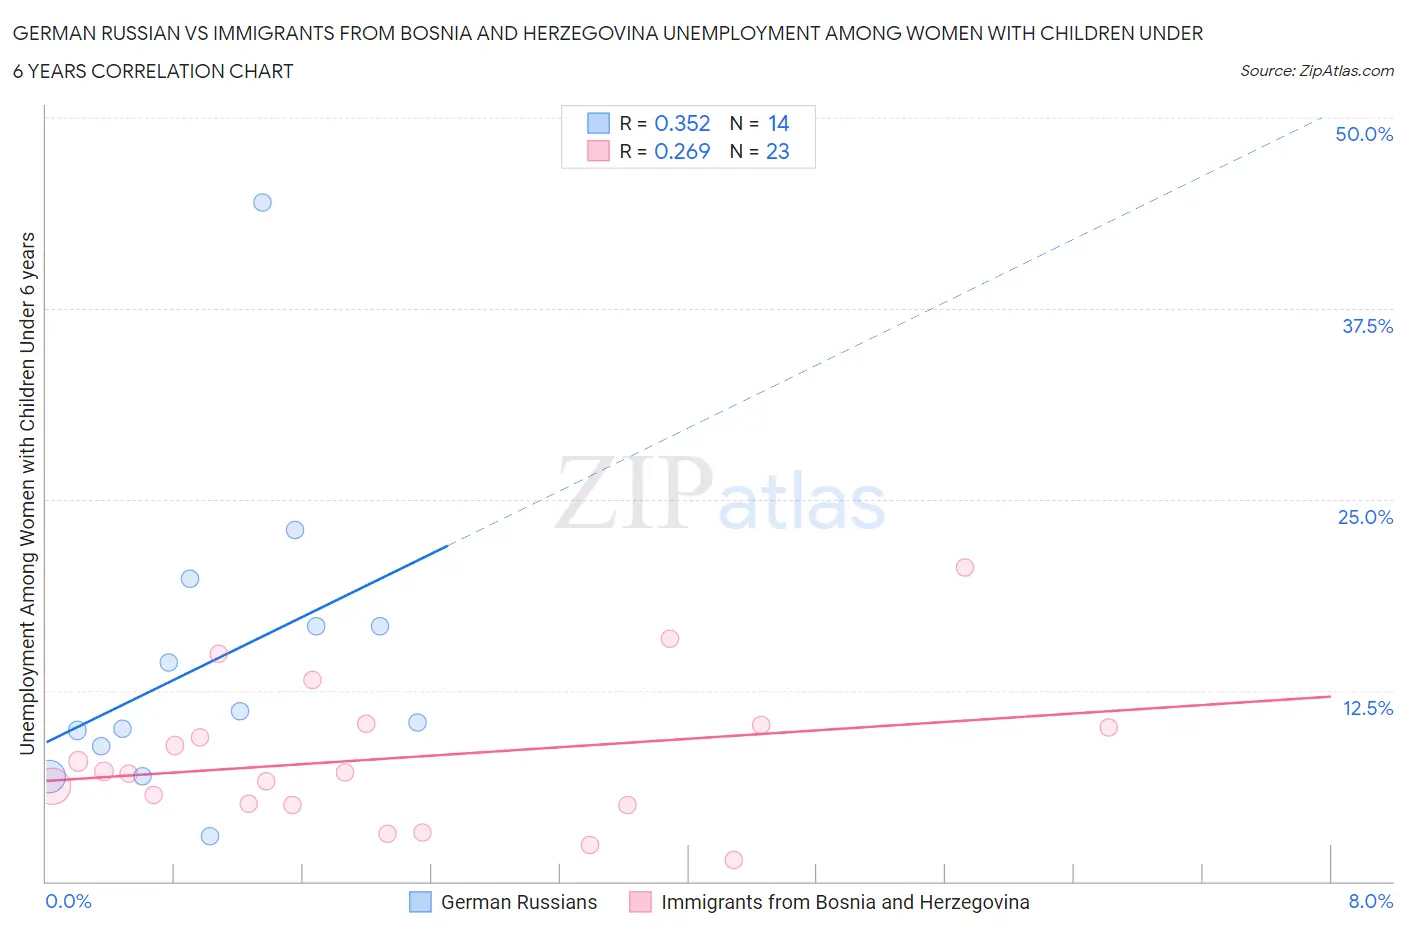 German Russian vs Immigrants from Bosnia and Herzegovina Unemployment Among Women with Children Under 6 years